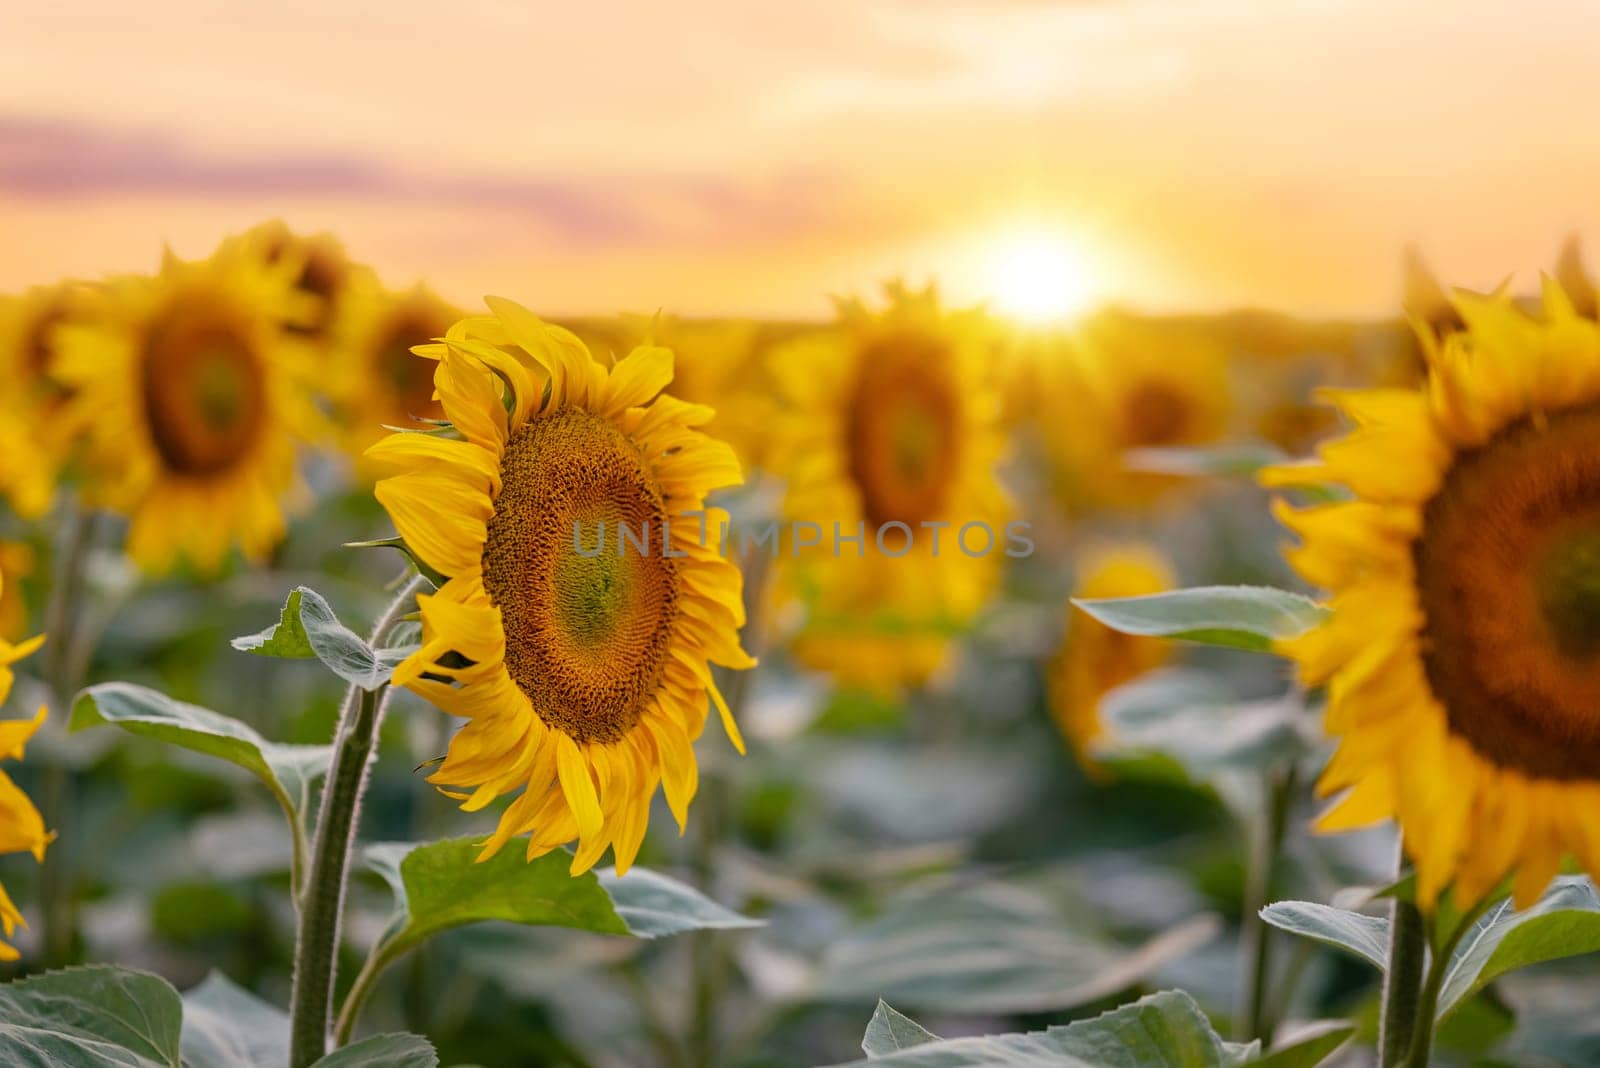 Majestic moment of beautiful field of blooming golden sunflowers in the evening